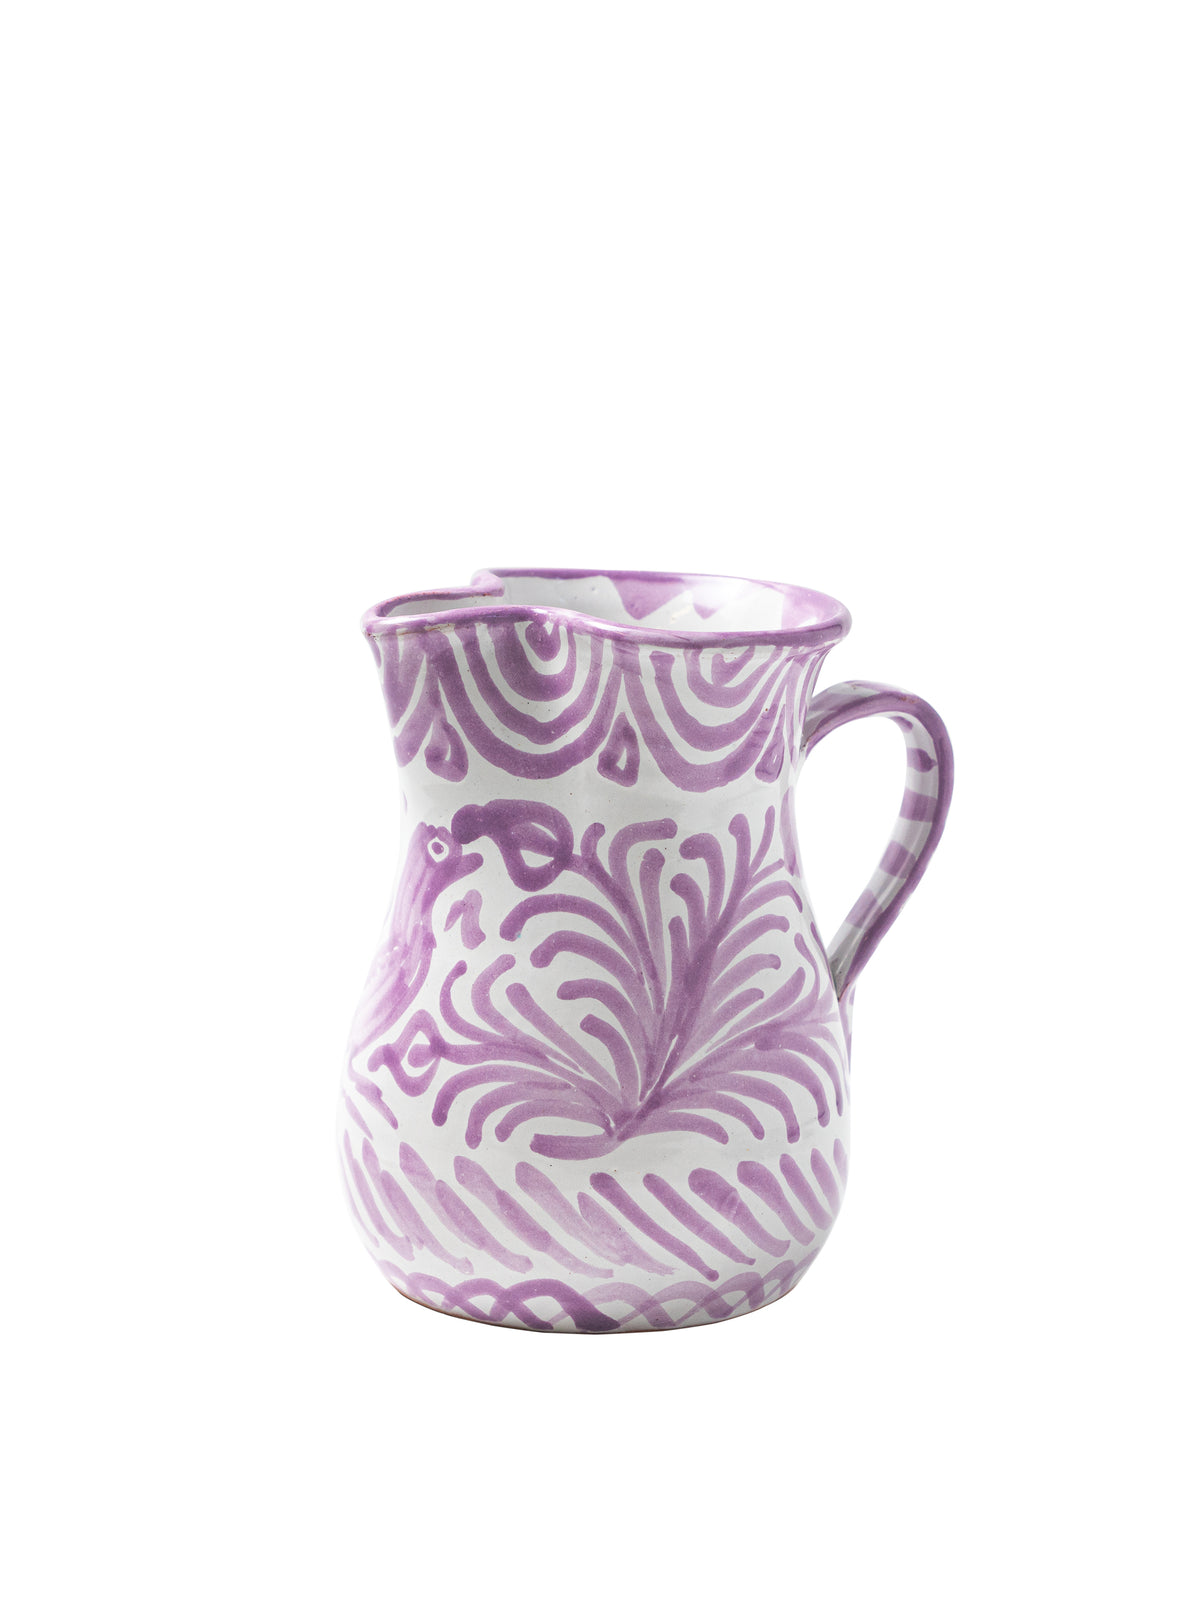 Casa Lila Small Pitcher with Hand-painted Designs